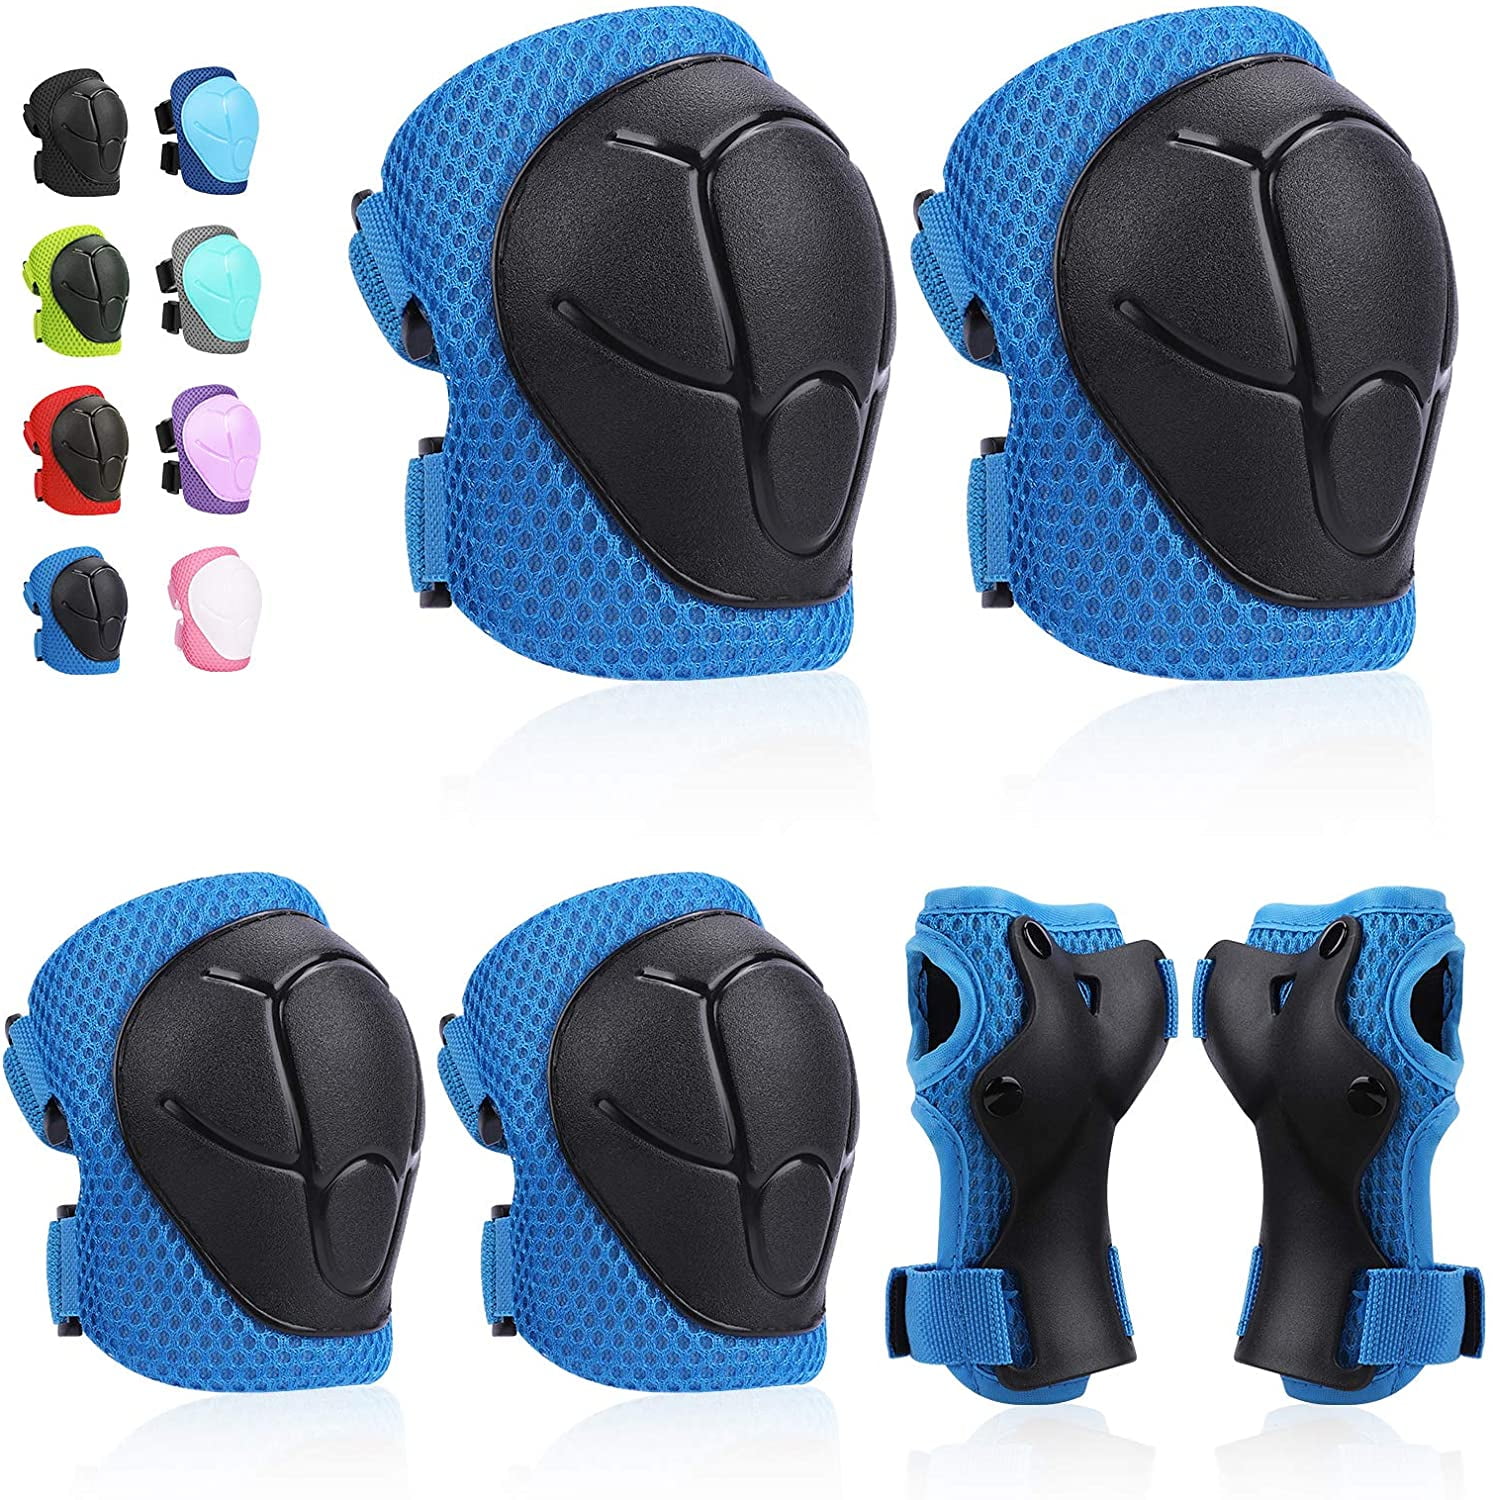 Kids Knee Pads Set Cycling Children Protection Safety for Roller Skates 6 in 1 Kit Protective Gear Knee Elbow Pads Wrist Guards Bike Skateboard 